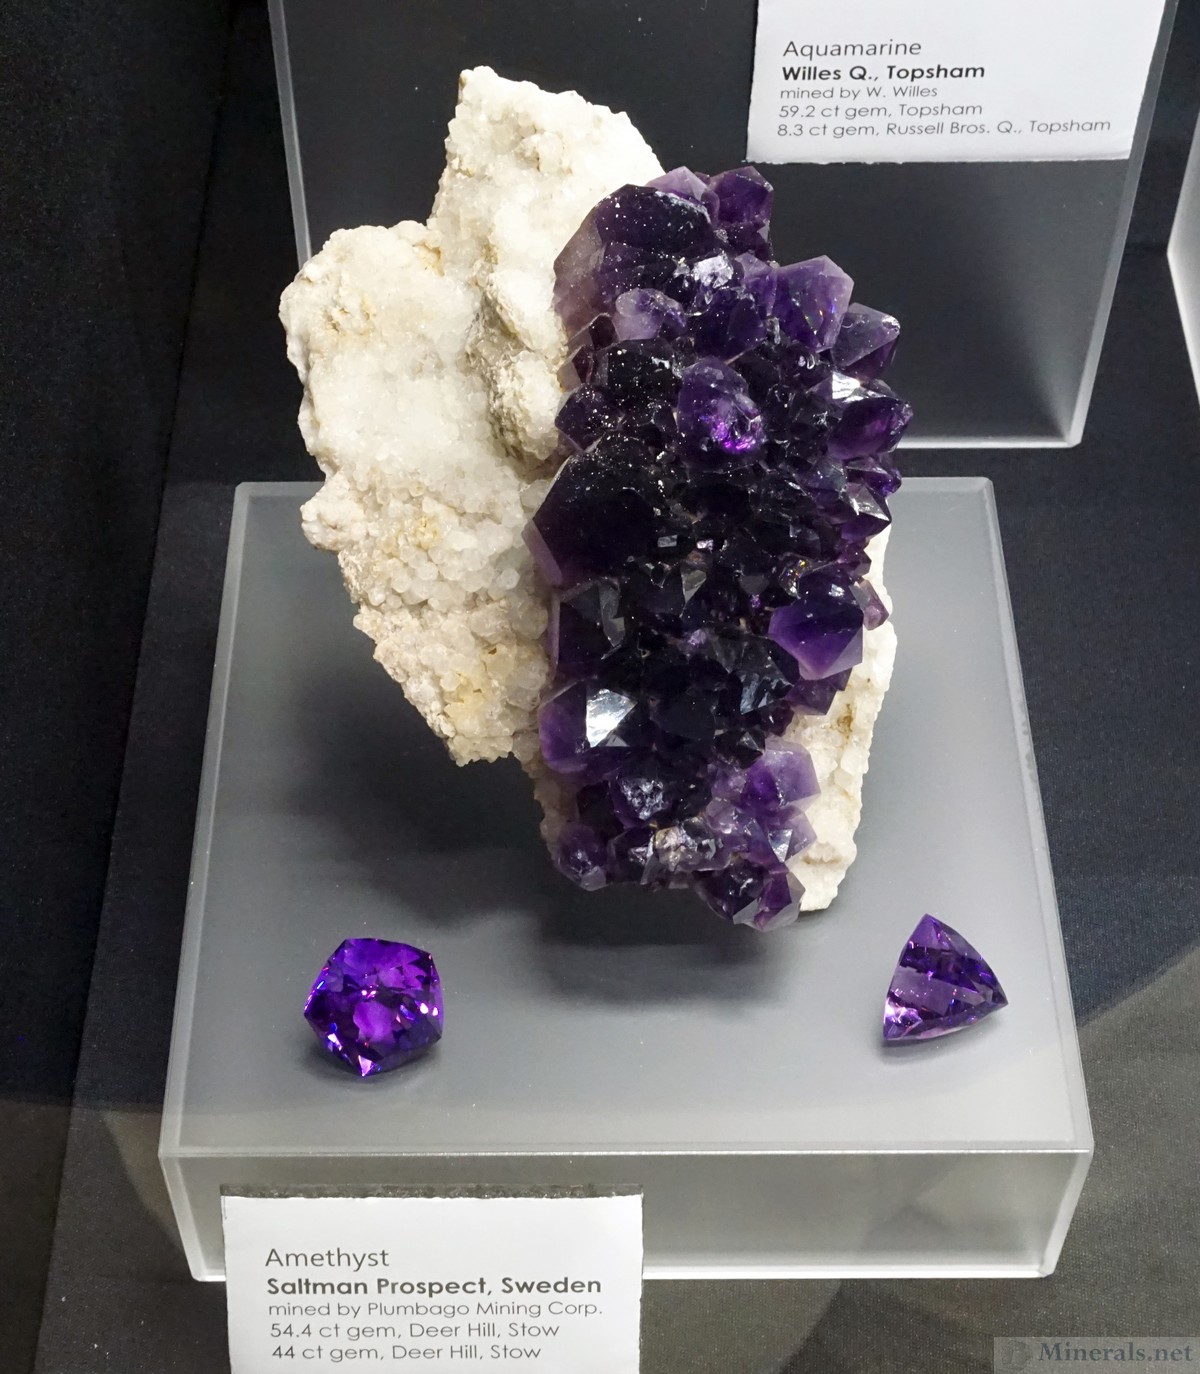 Amethyst Crystals with Cut Gemstones from the Saltman Prospect, Sweden, Oxford Co., Maine, Cut Gemstones from Deer Hill, Stow, Oxford Co., Maine Mineral & Gem Museum